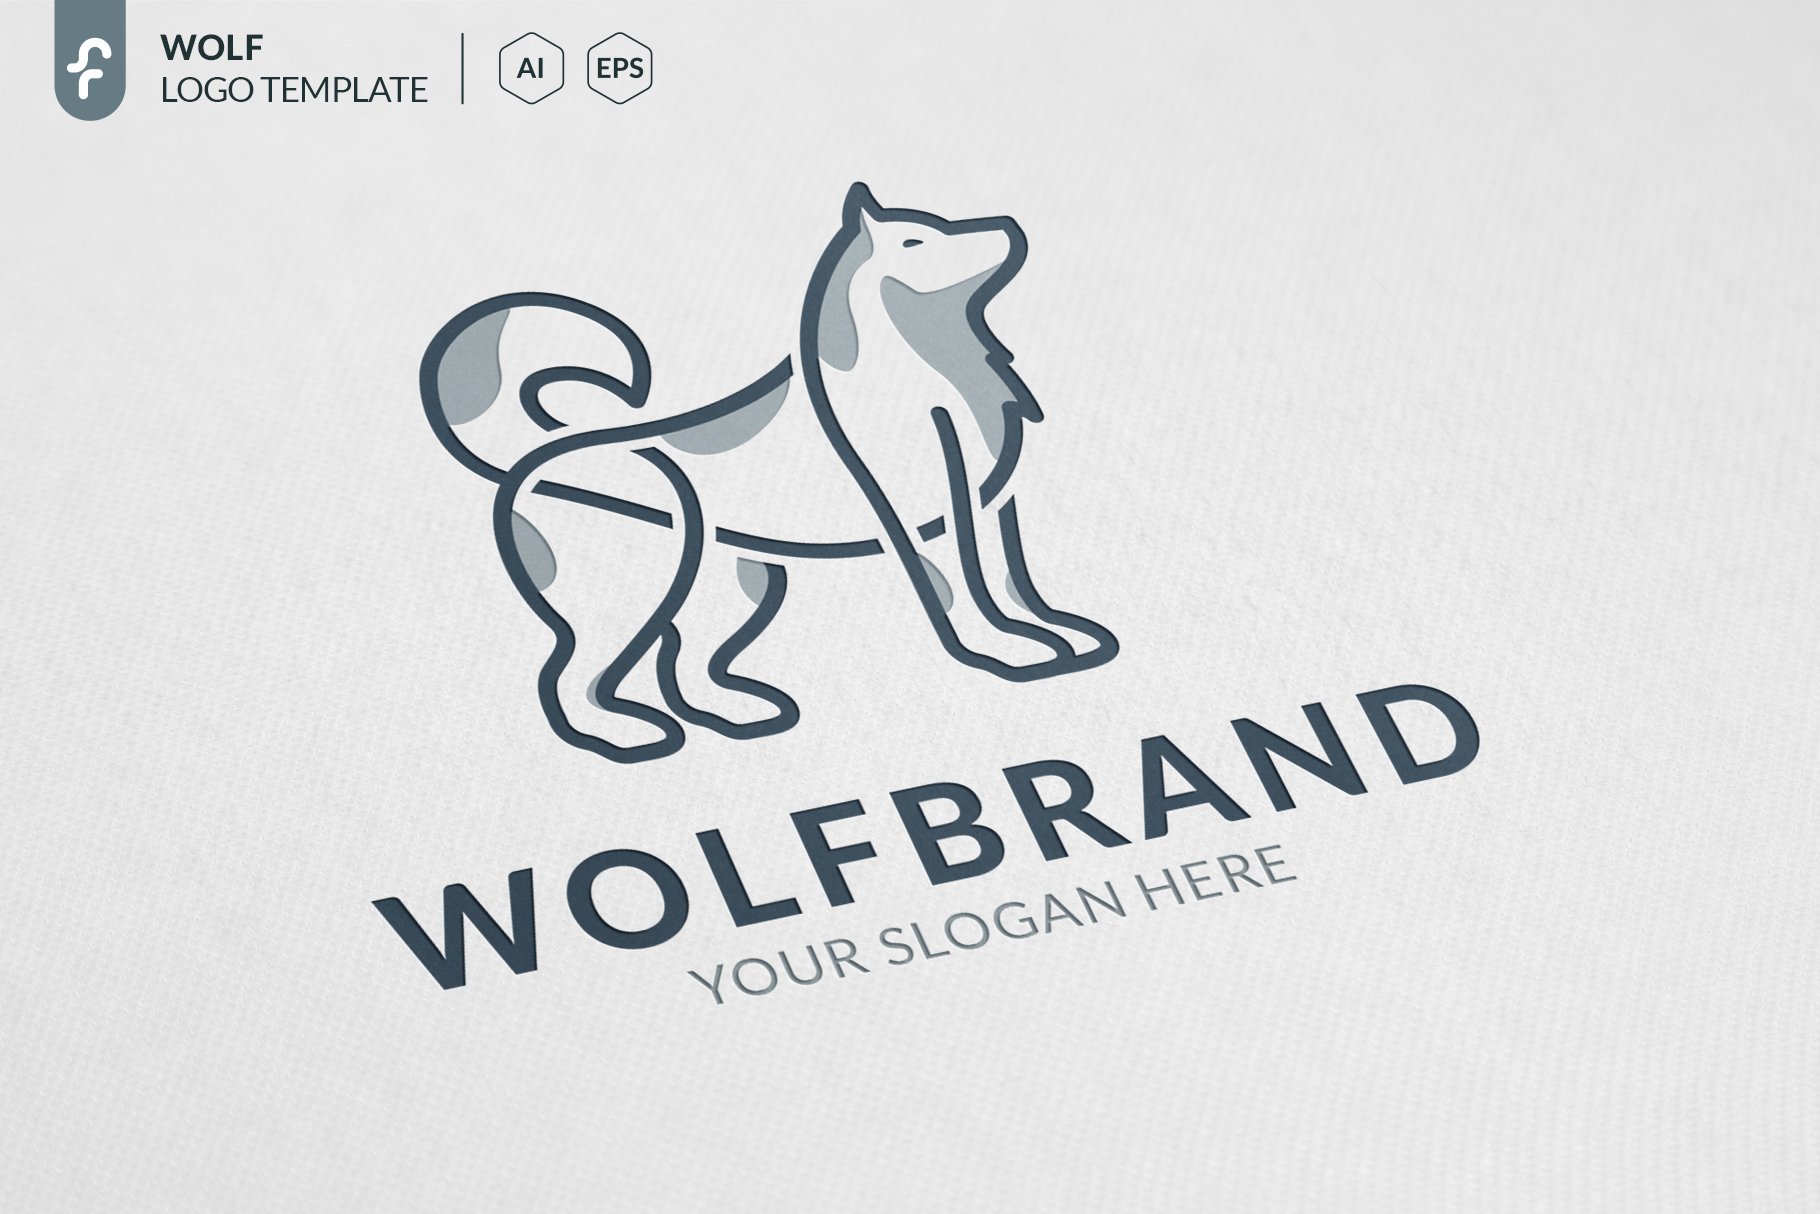 Wolf Brand Logo cover image.